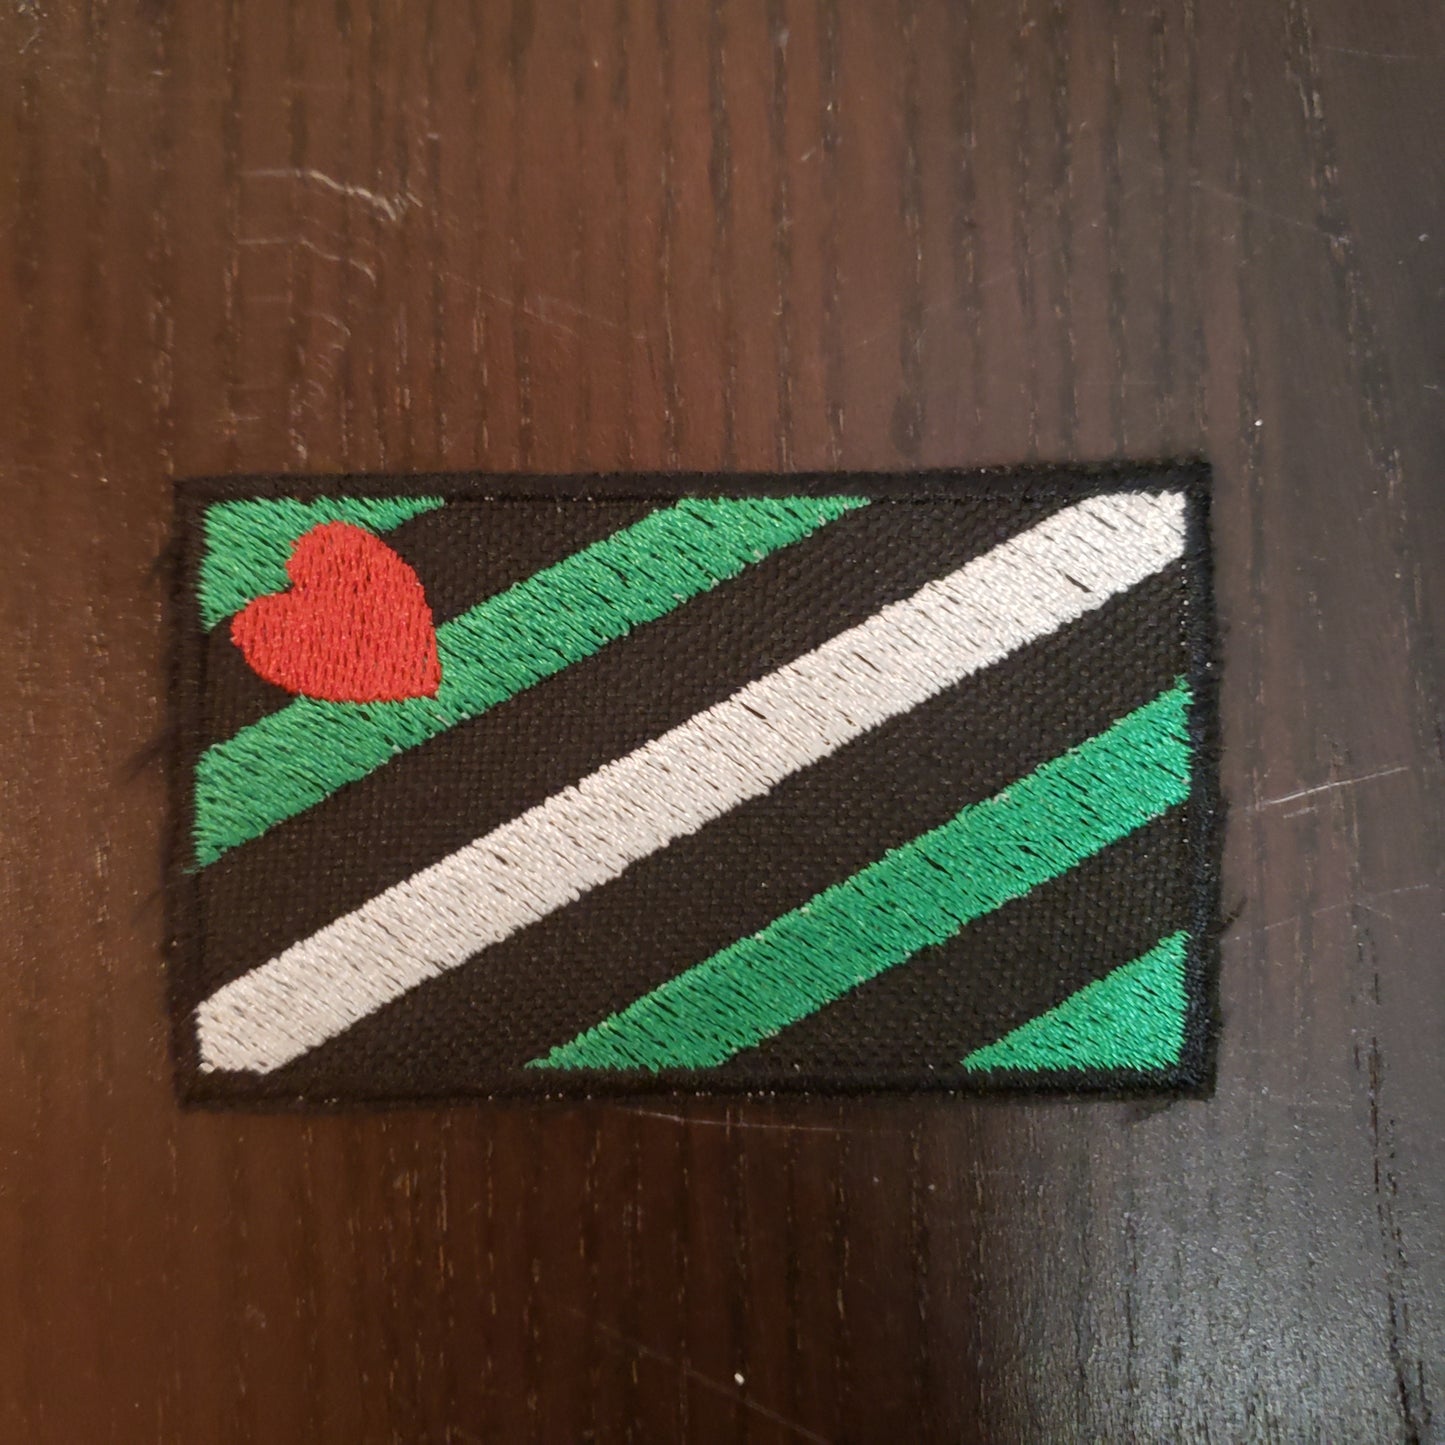 The Leather Boy Leather Bar Lapel Patch.